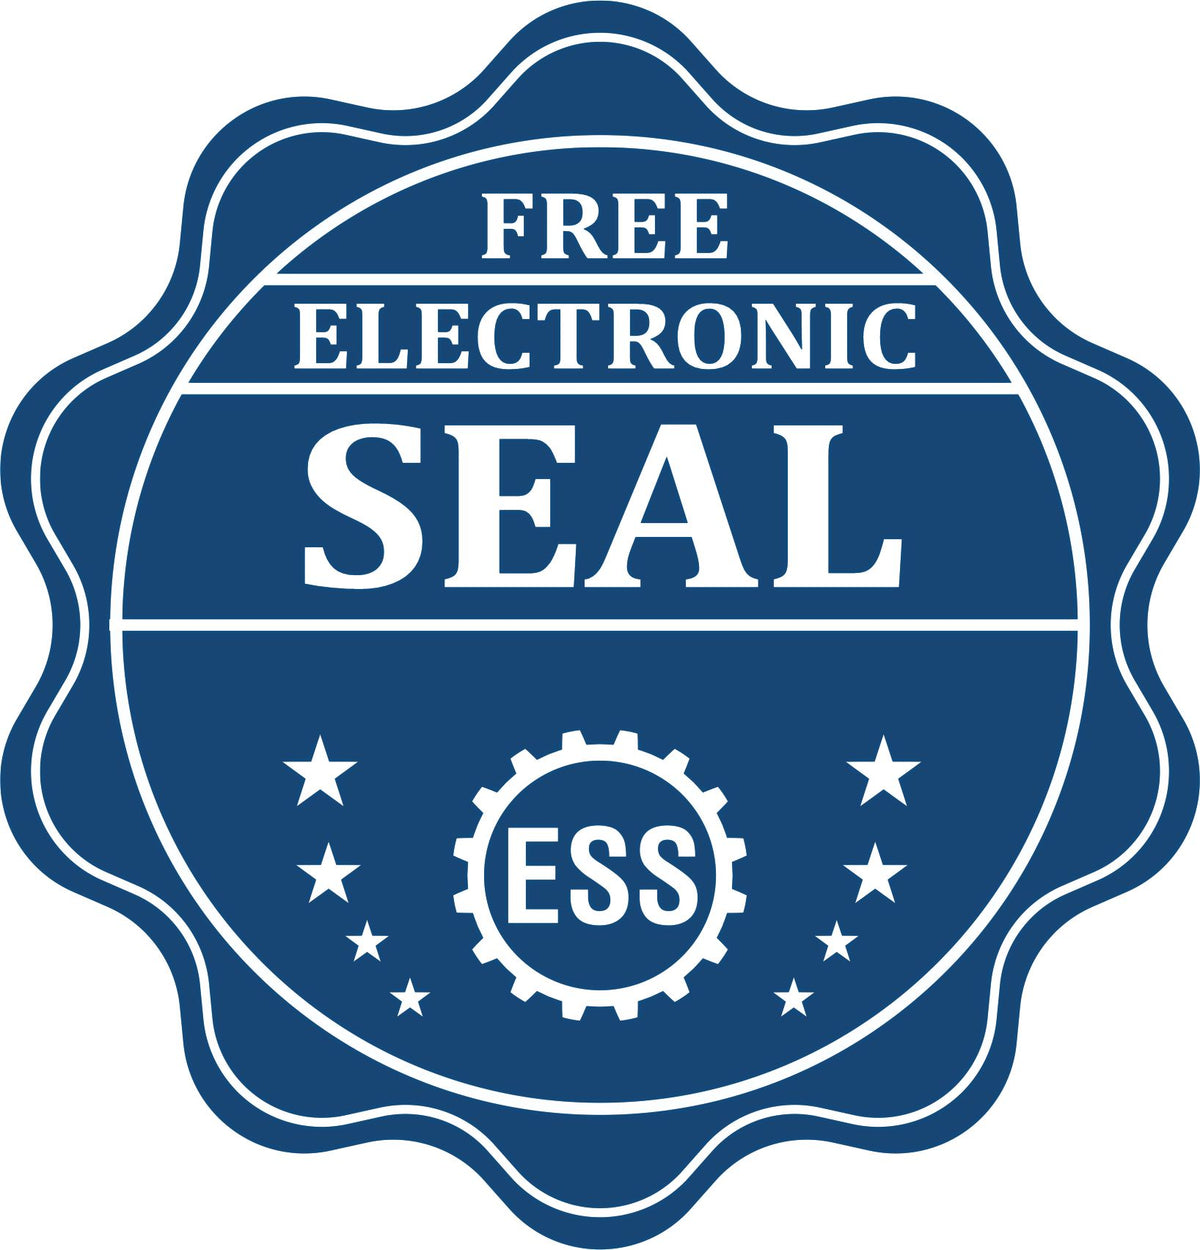 A badge showing a free electronic seal for the State of Kansas Long Reach Architectural Embossing Seal with stars and the ESS gear on the emblem.